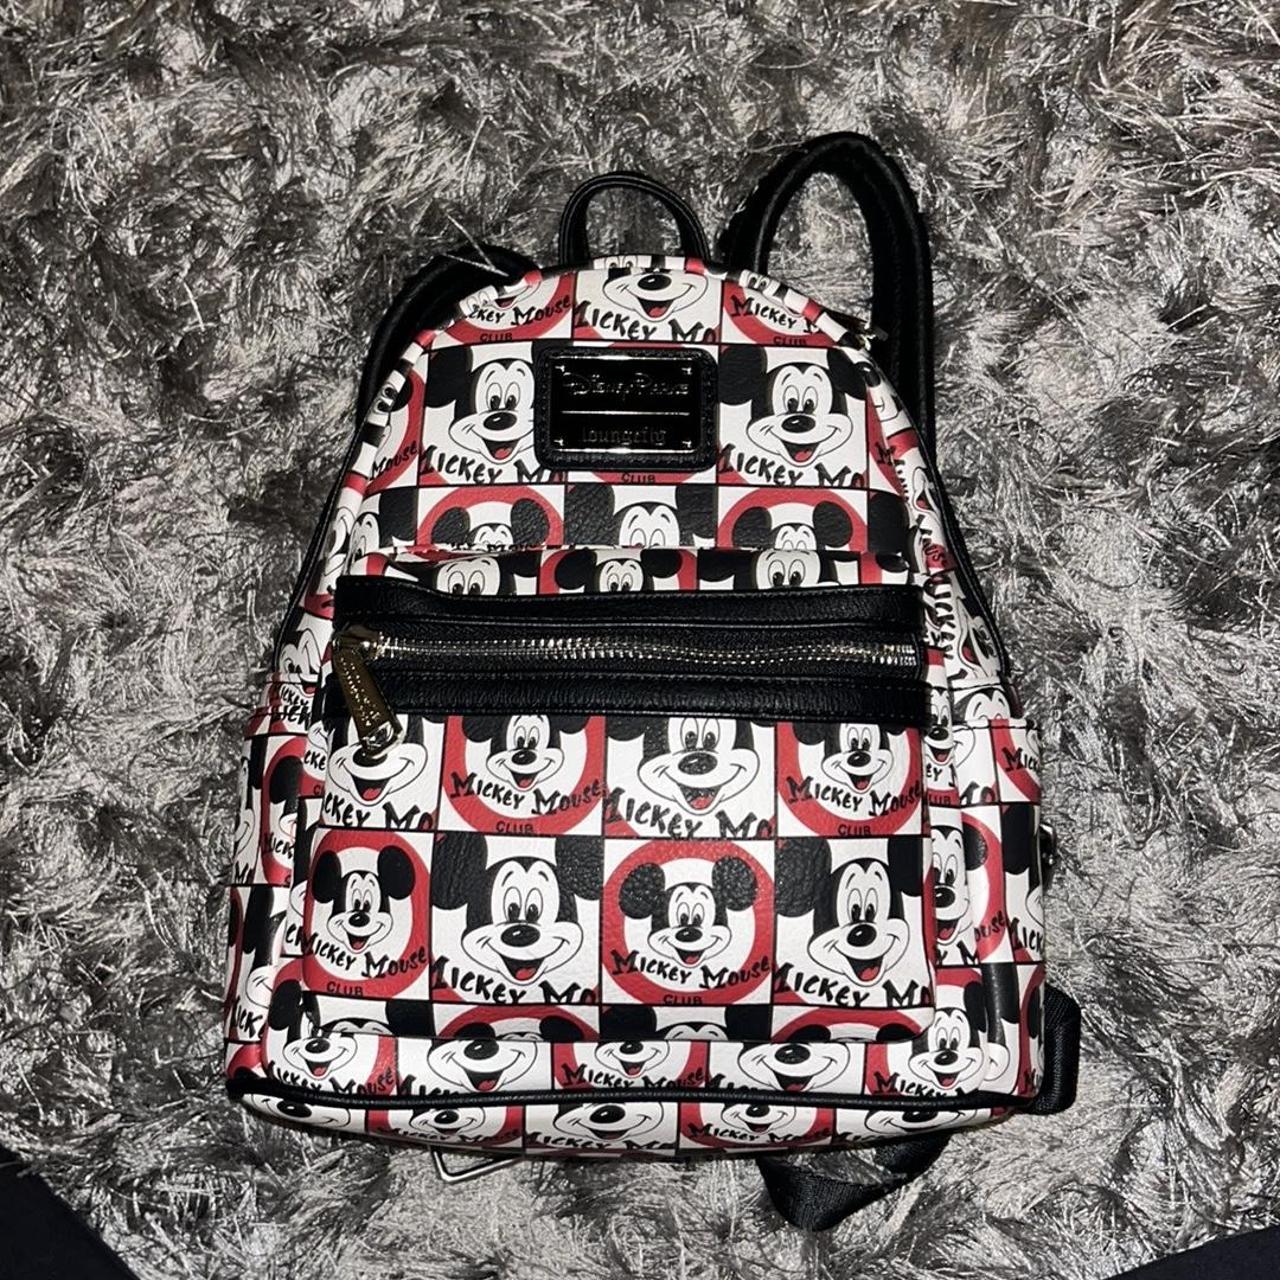 A NEW Ride-Themed Loungefly Bag Is In Disney World! | the disney food blog